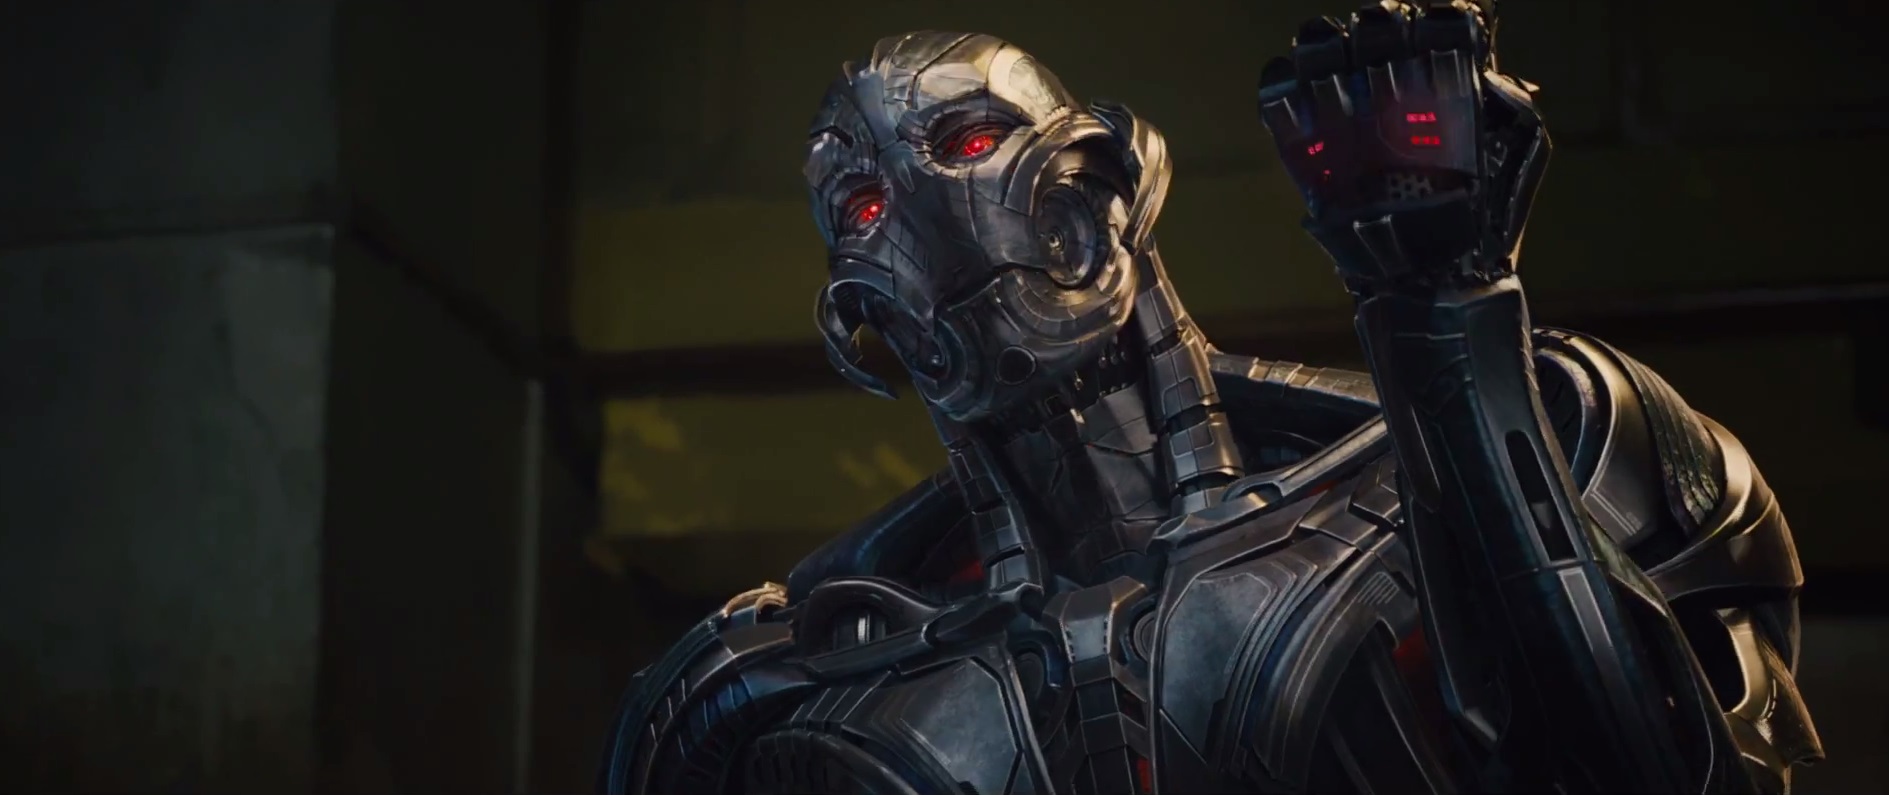 Ultron from Avengers: Age of Ultron 